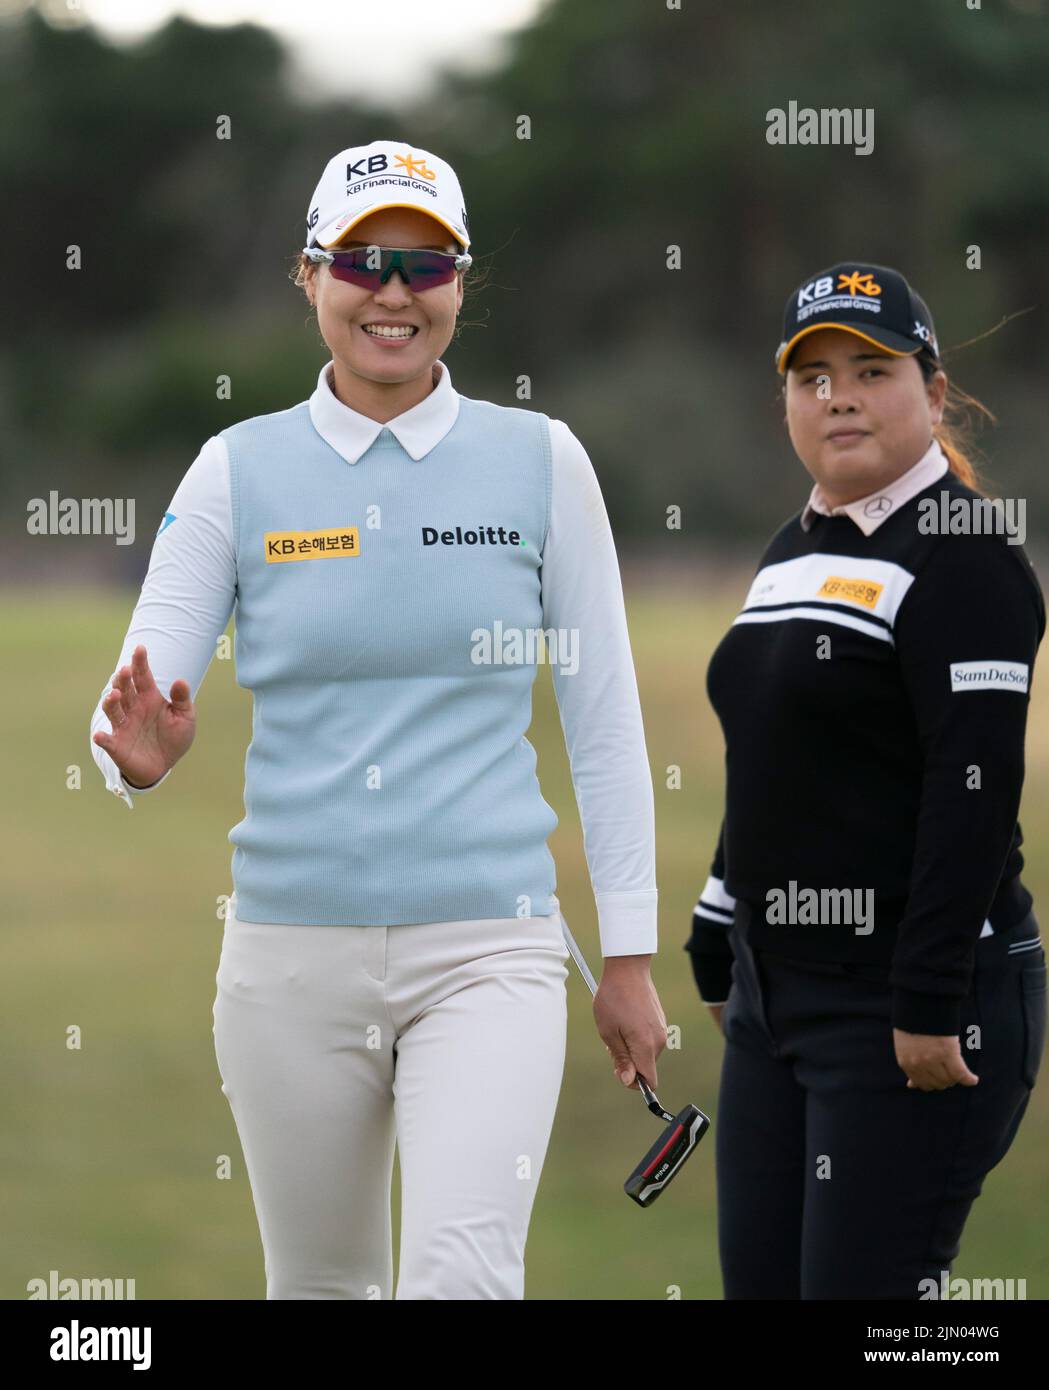 Gullane, Scotland, UK. 7th August 2022. Final  round of the AIG Women’s Open golf championship at Muirfield in Gullane, East Lothian. Pic; Chun In Gee reacts after missing birdie putt on the 16th green.  Iain Masterton/Alamy Live News Stock Photo